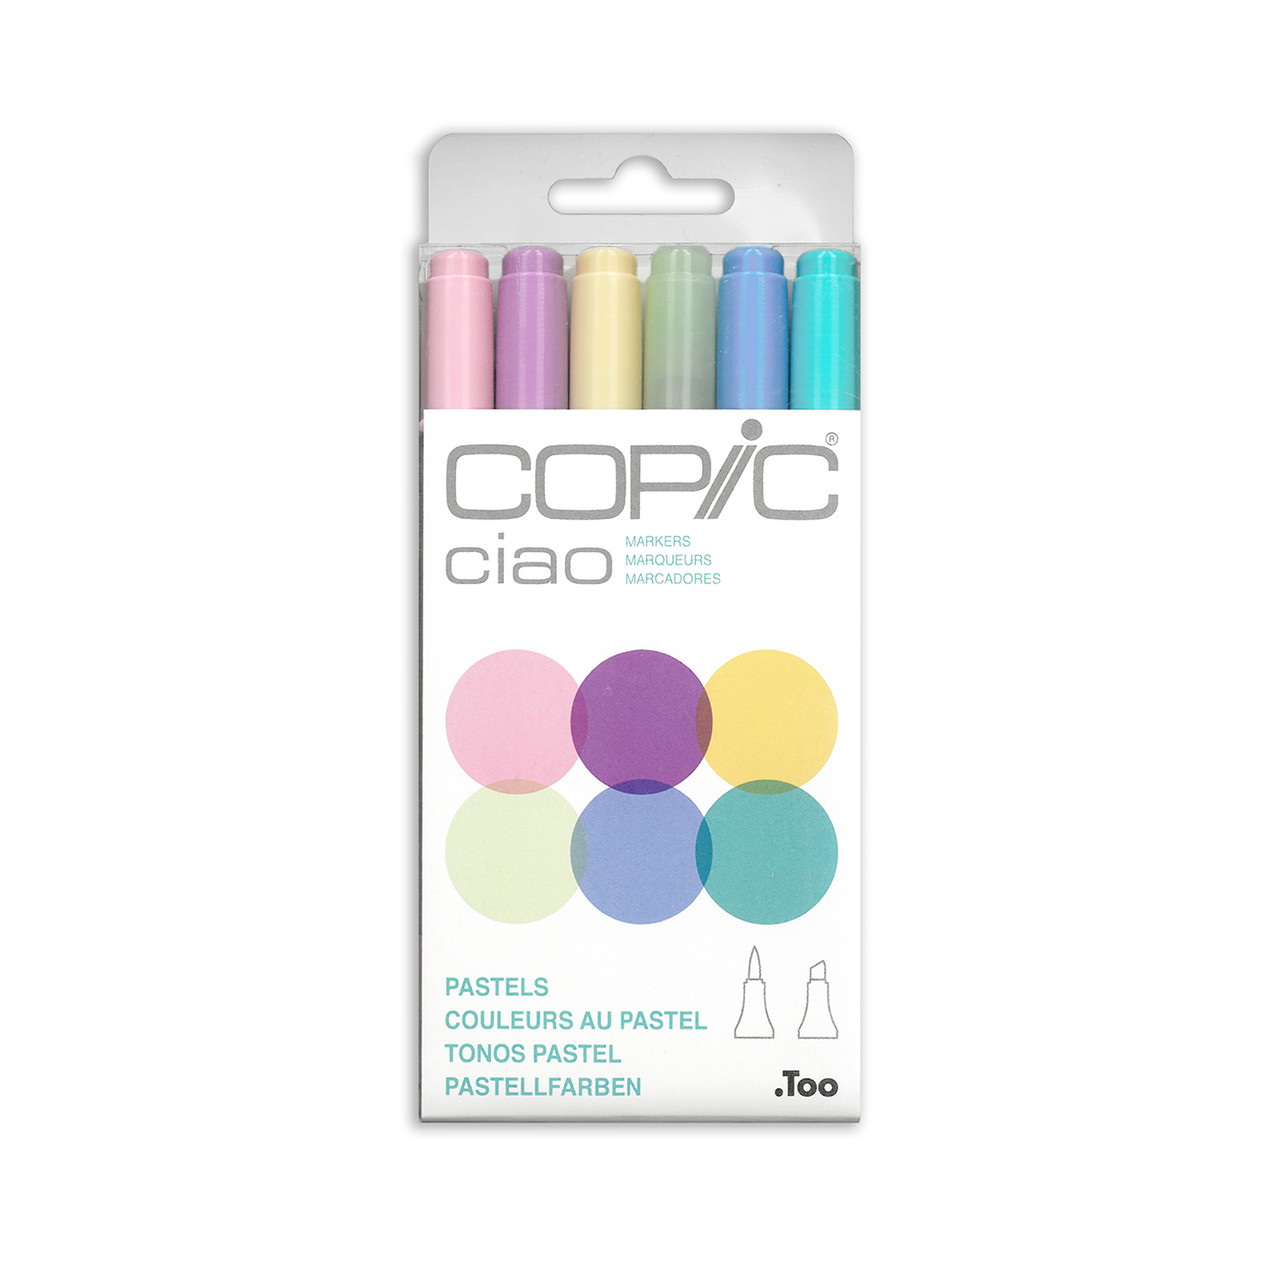 Copic Ciao Marker My First Starter Set